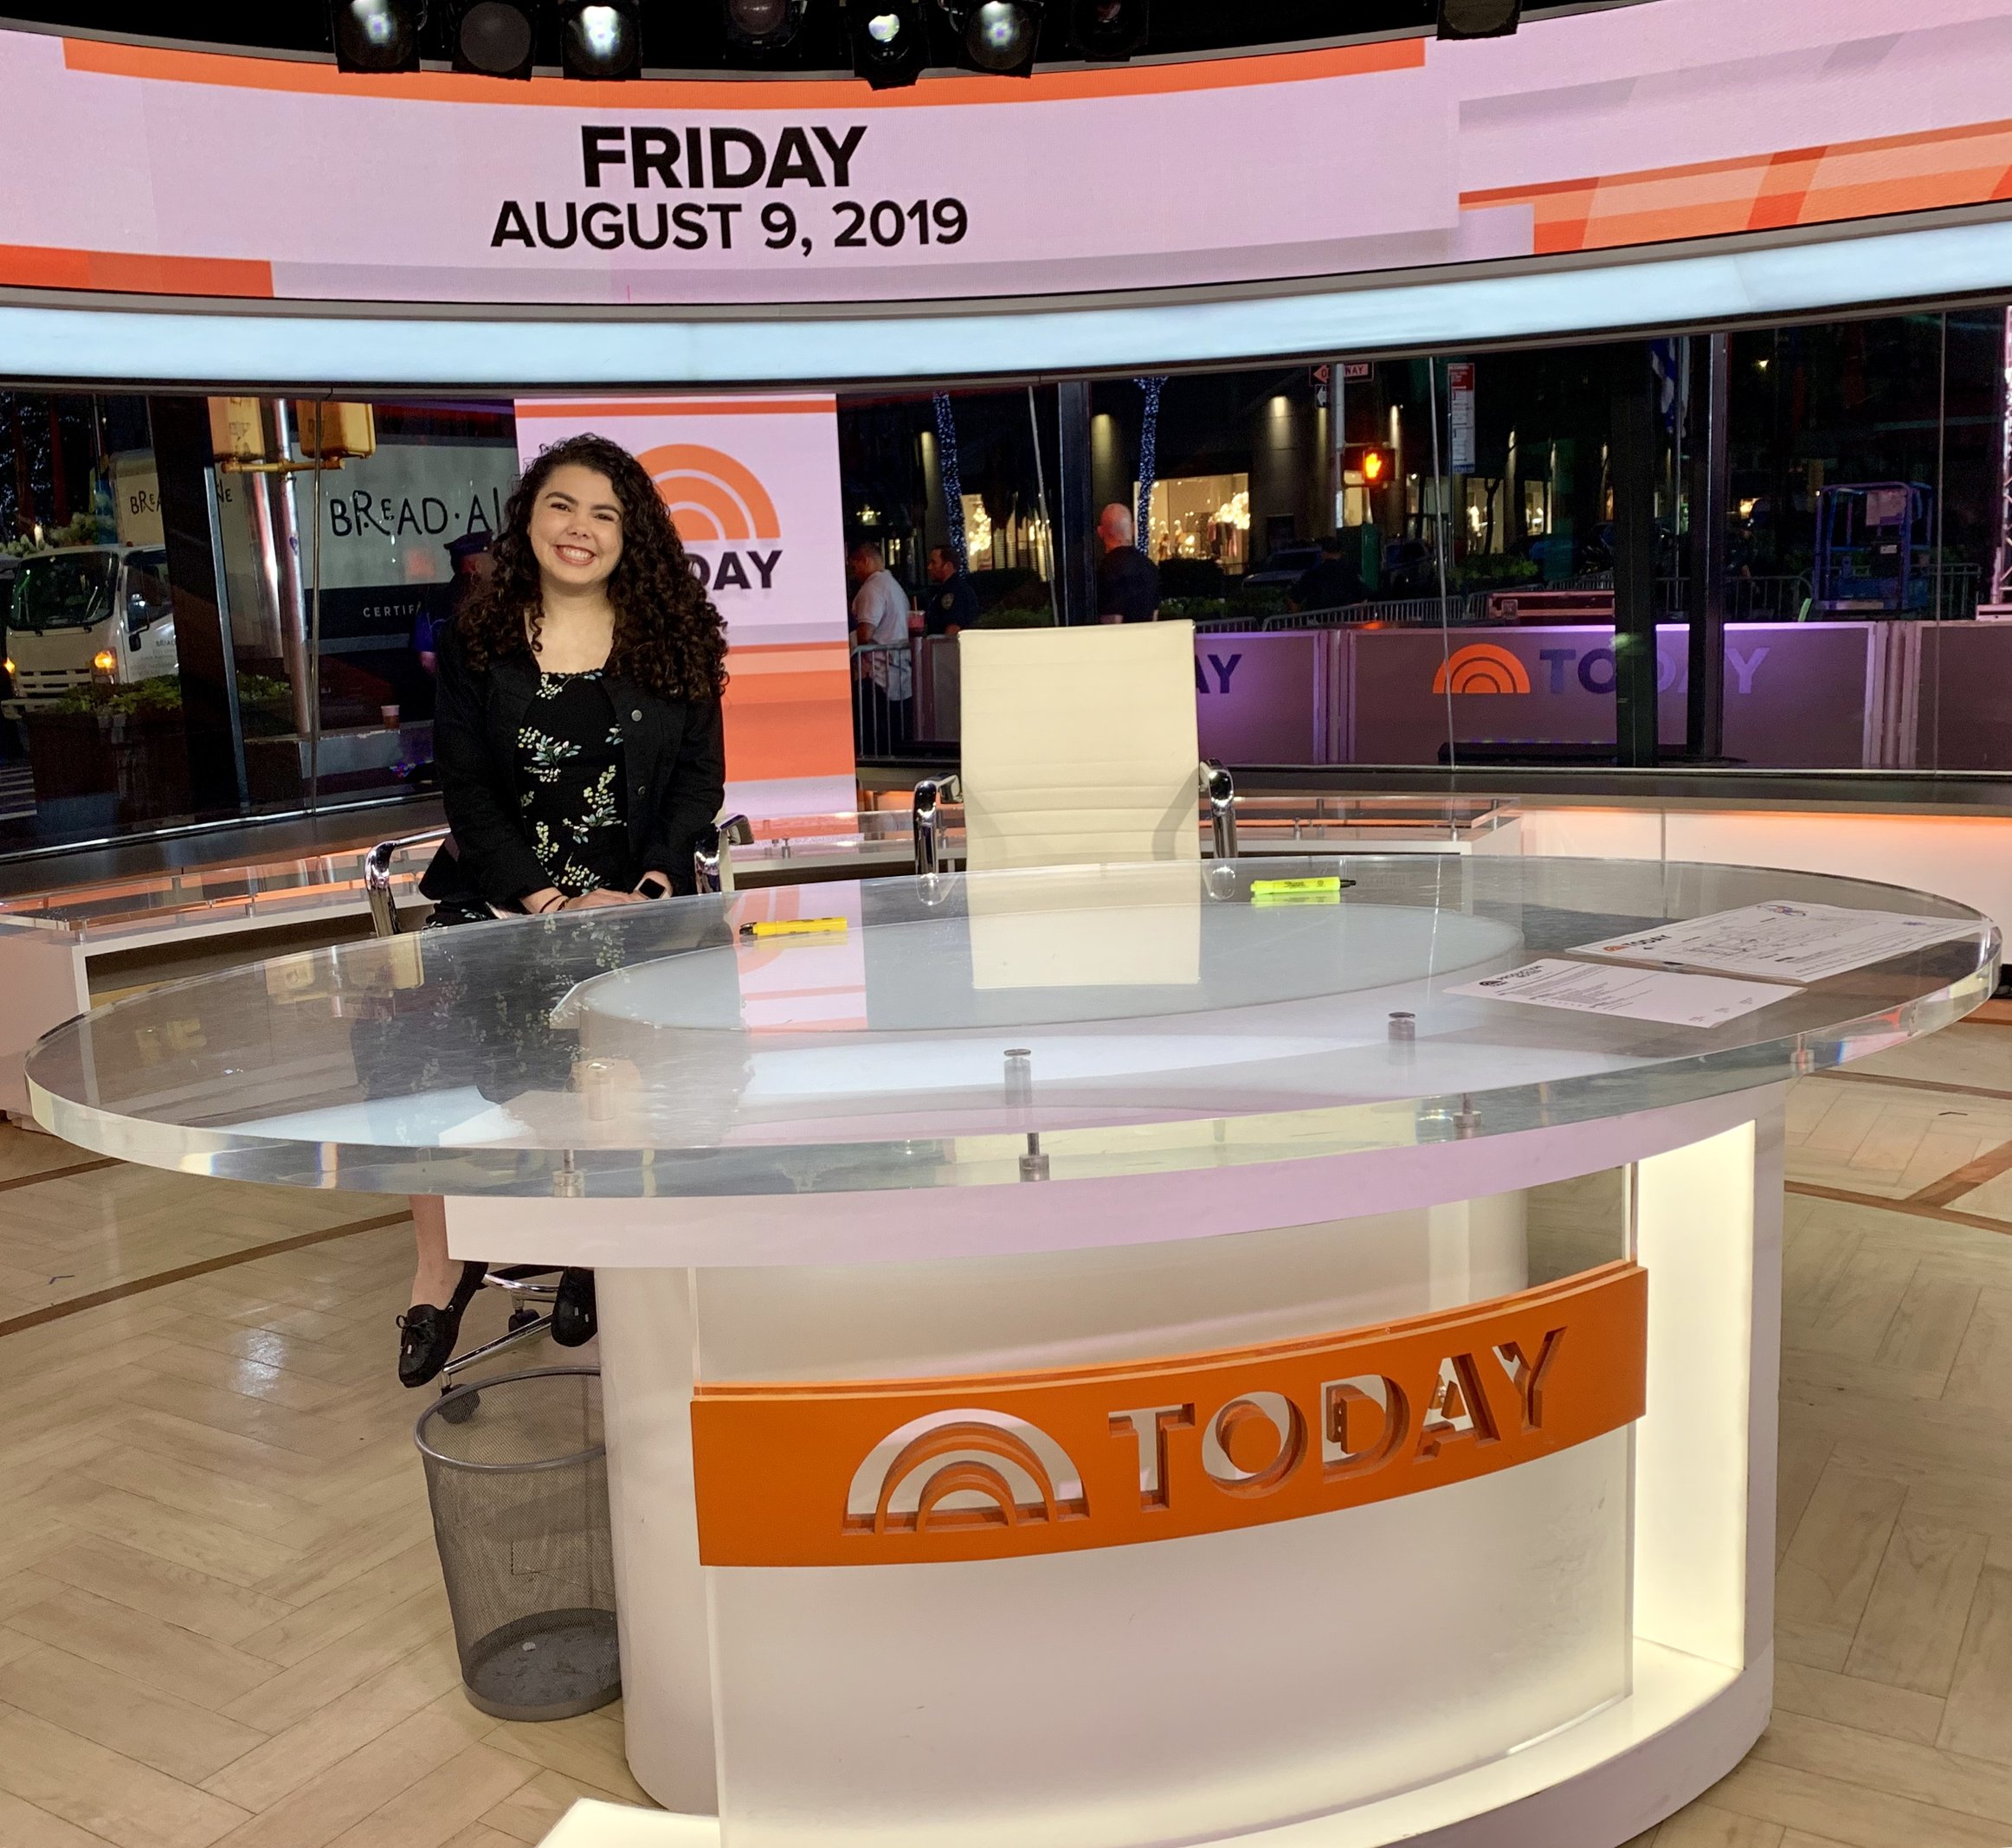 Ohio Junior Wins 10 000 Scholarship Completes Today Show